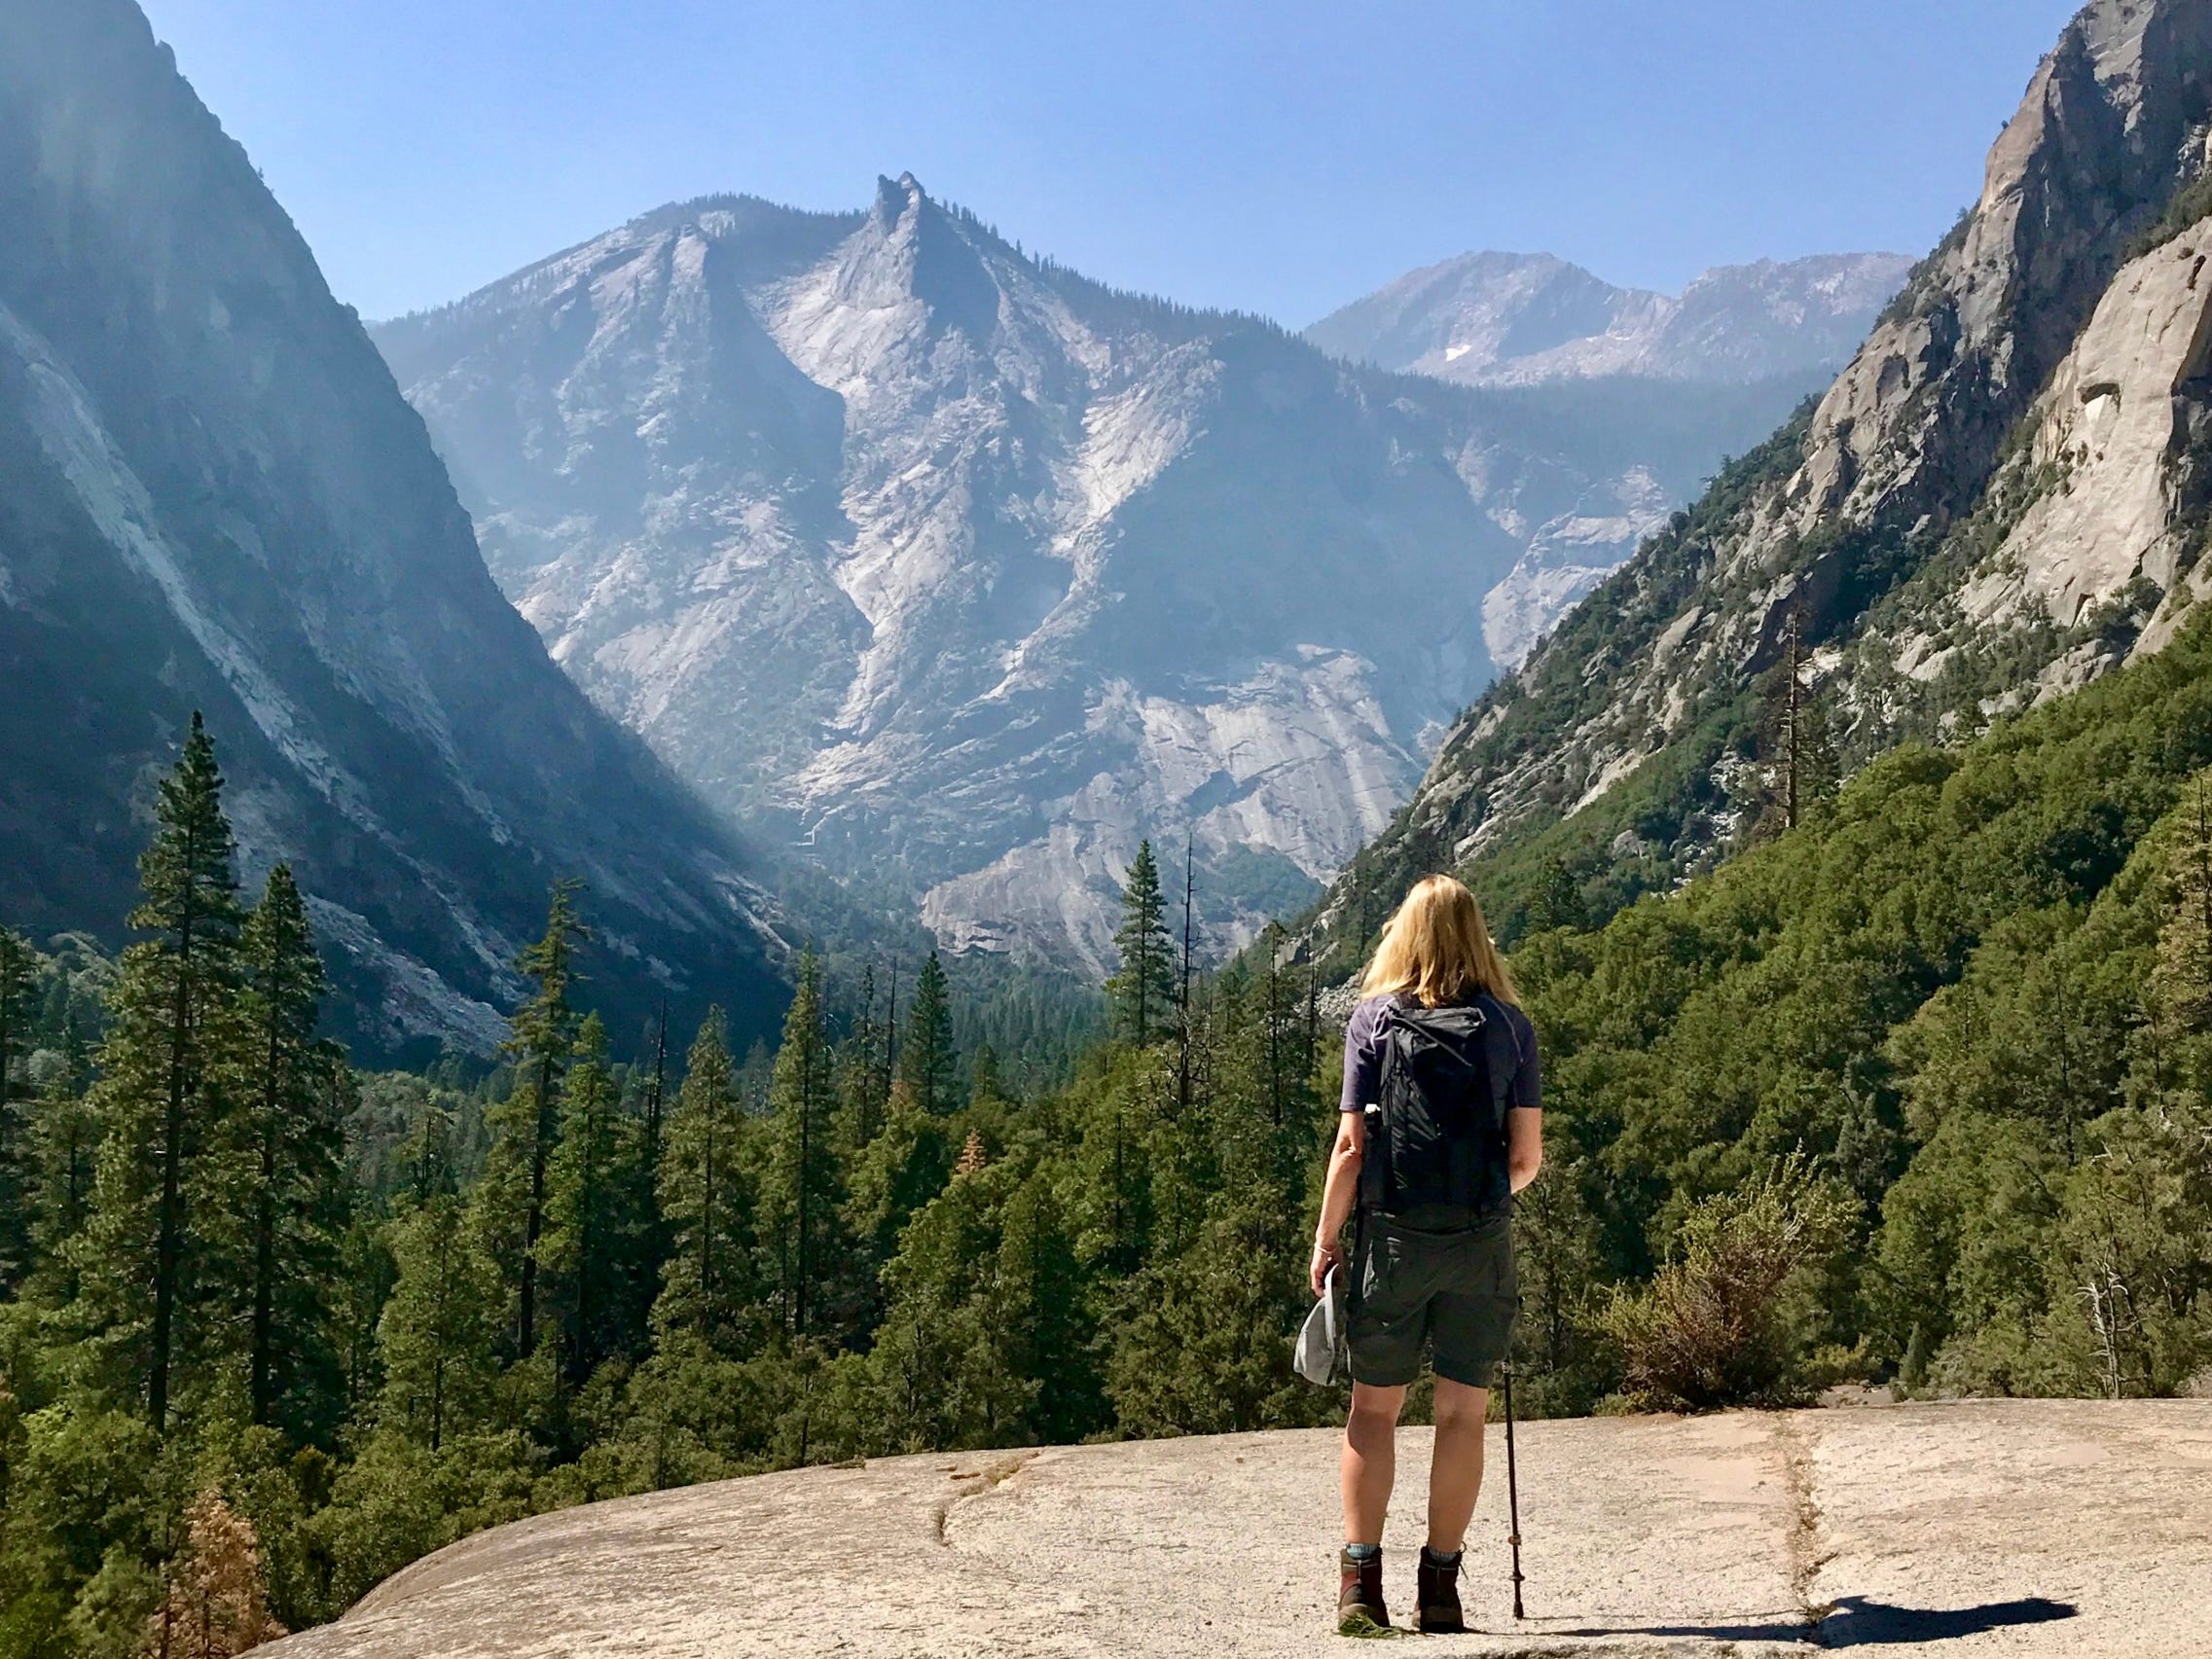 <p>For those interested in escaping the crowds at a national park in the summer, the Smiths would encourage looking into Kings Canyon in California.</p><p>The Cedar Grove area of the park is similar to Yosemite Valley, but without the crowds, they say. While access depends on the snow conditions, they say the best chances of a successful visit is from July to September. </p>